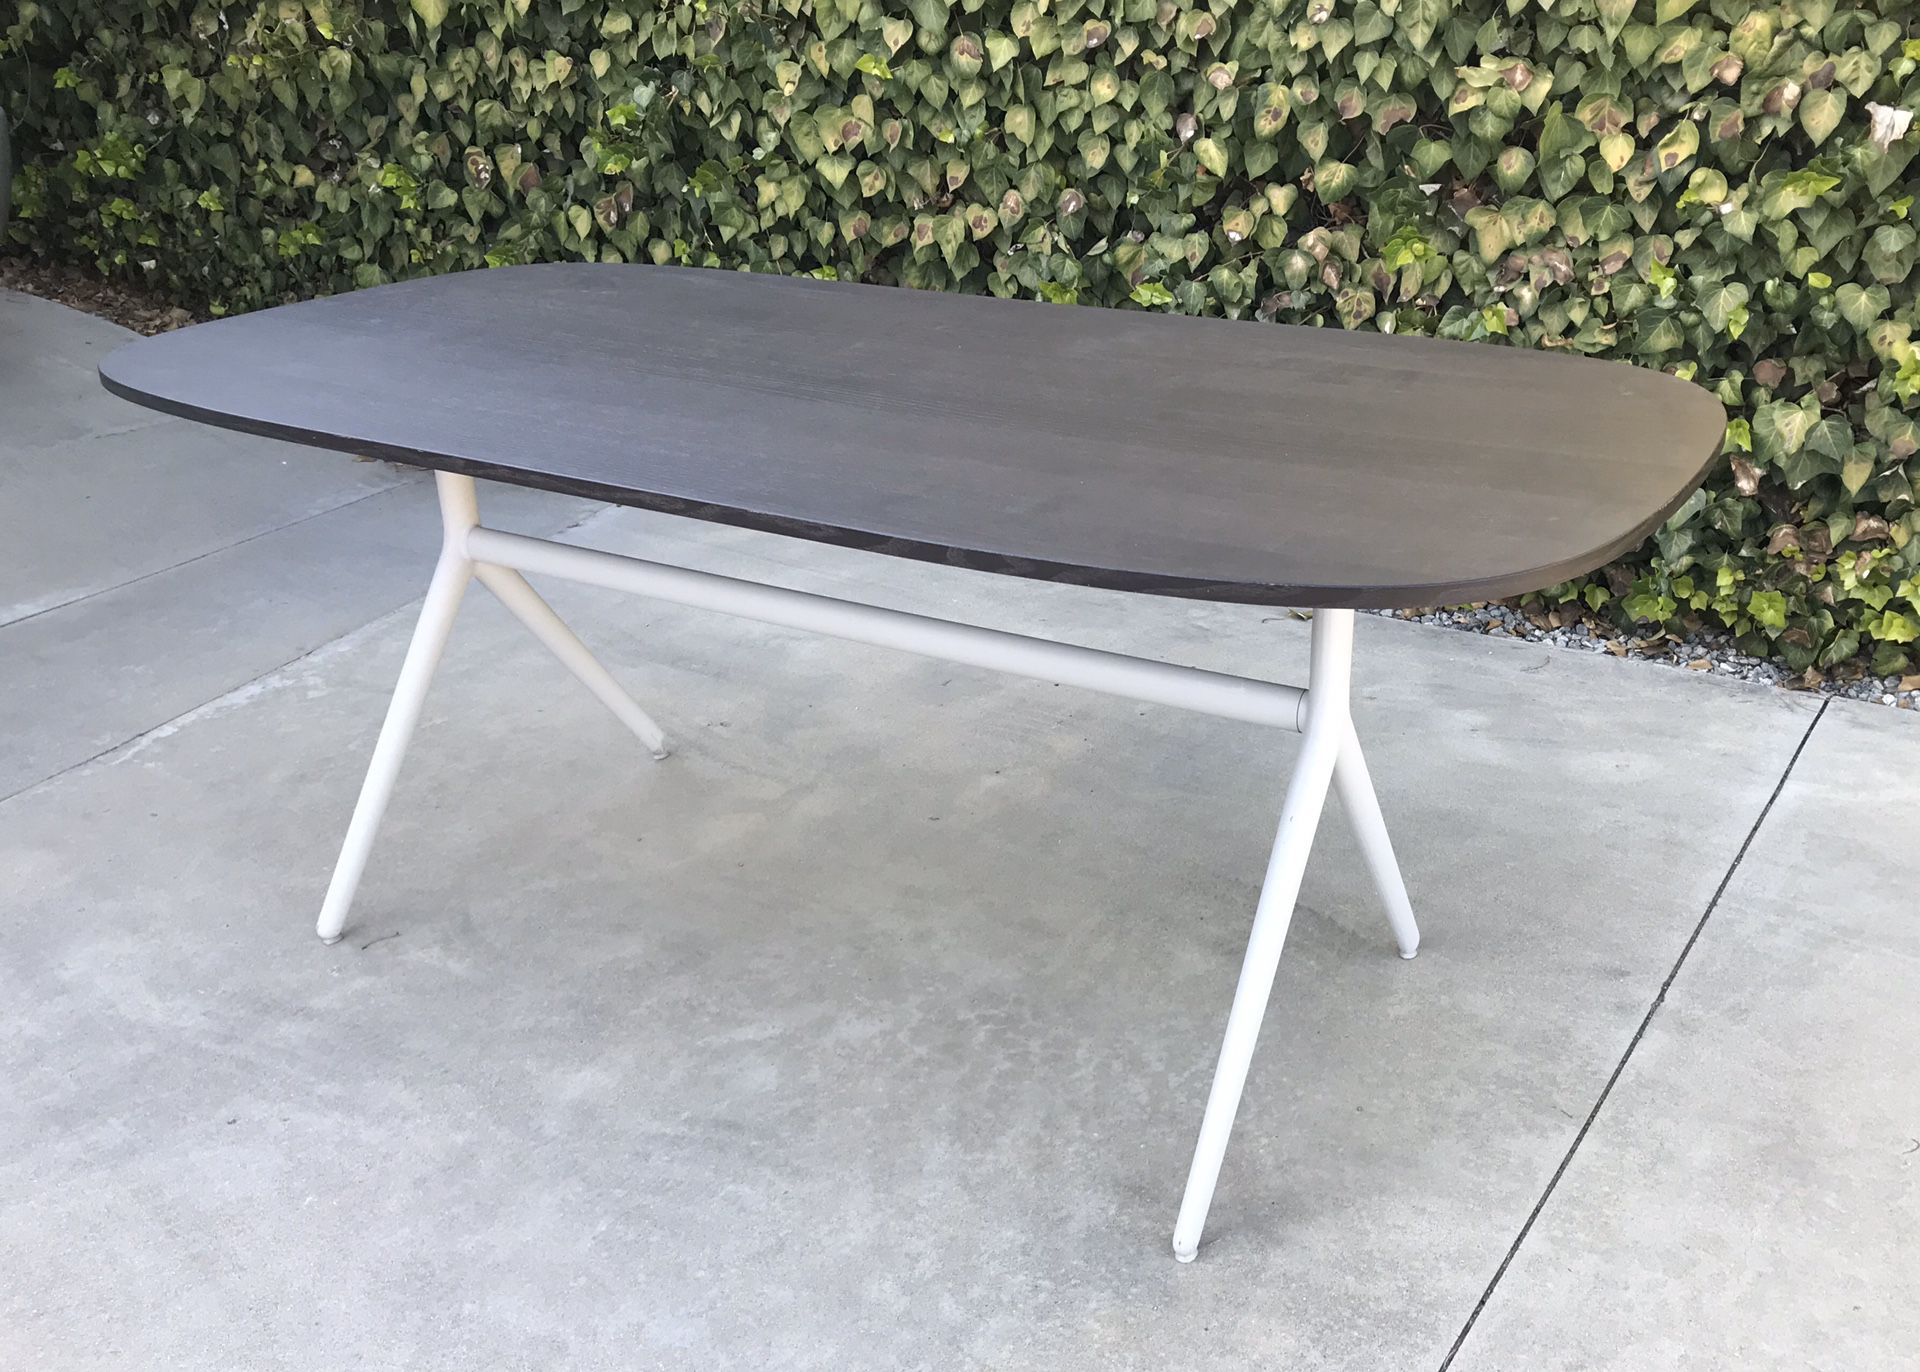 Wood Table with Metal Frame